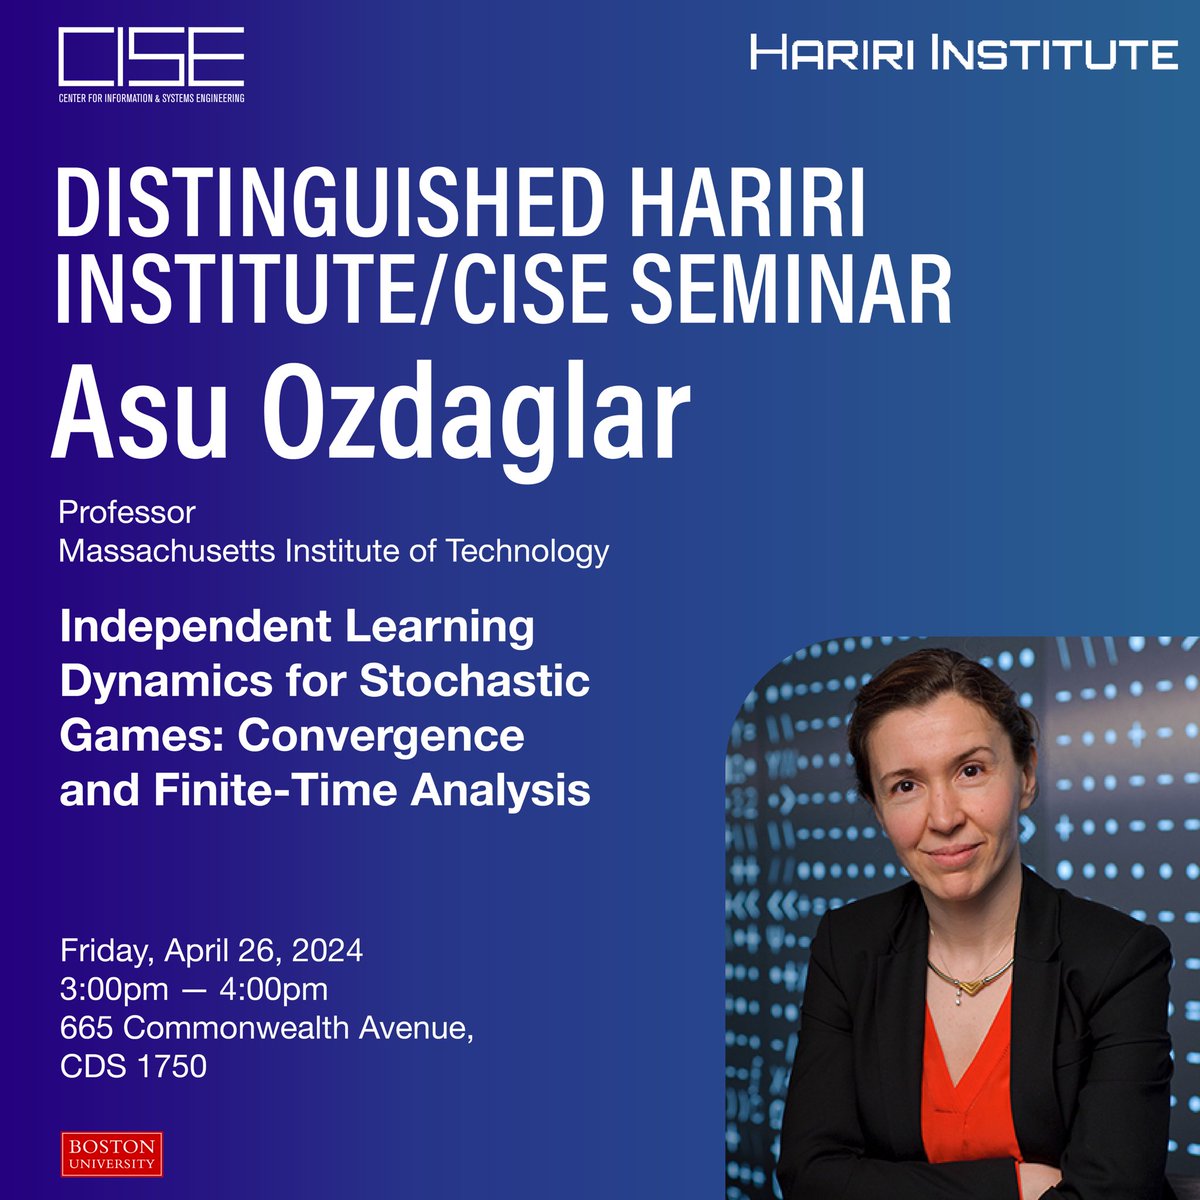 Join us this Friday to hear Asu Ozdaglar's Distinguished Hariri Institute/CISE Seminar at CDS 1750 from 3-4 PM! Read the abstract here: bu.edu/cise/cise-semi…